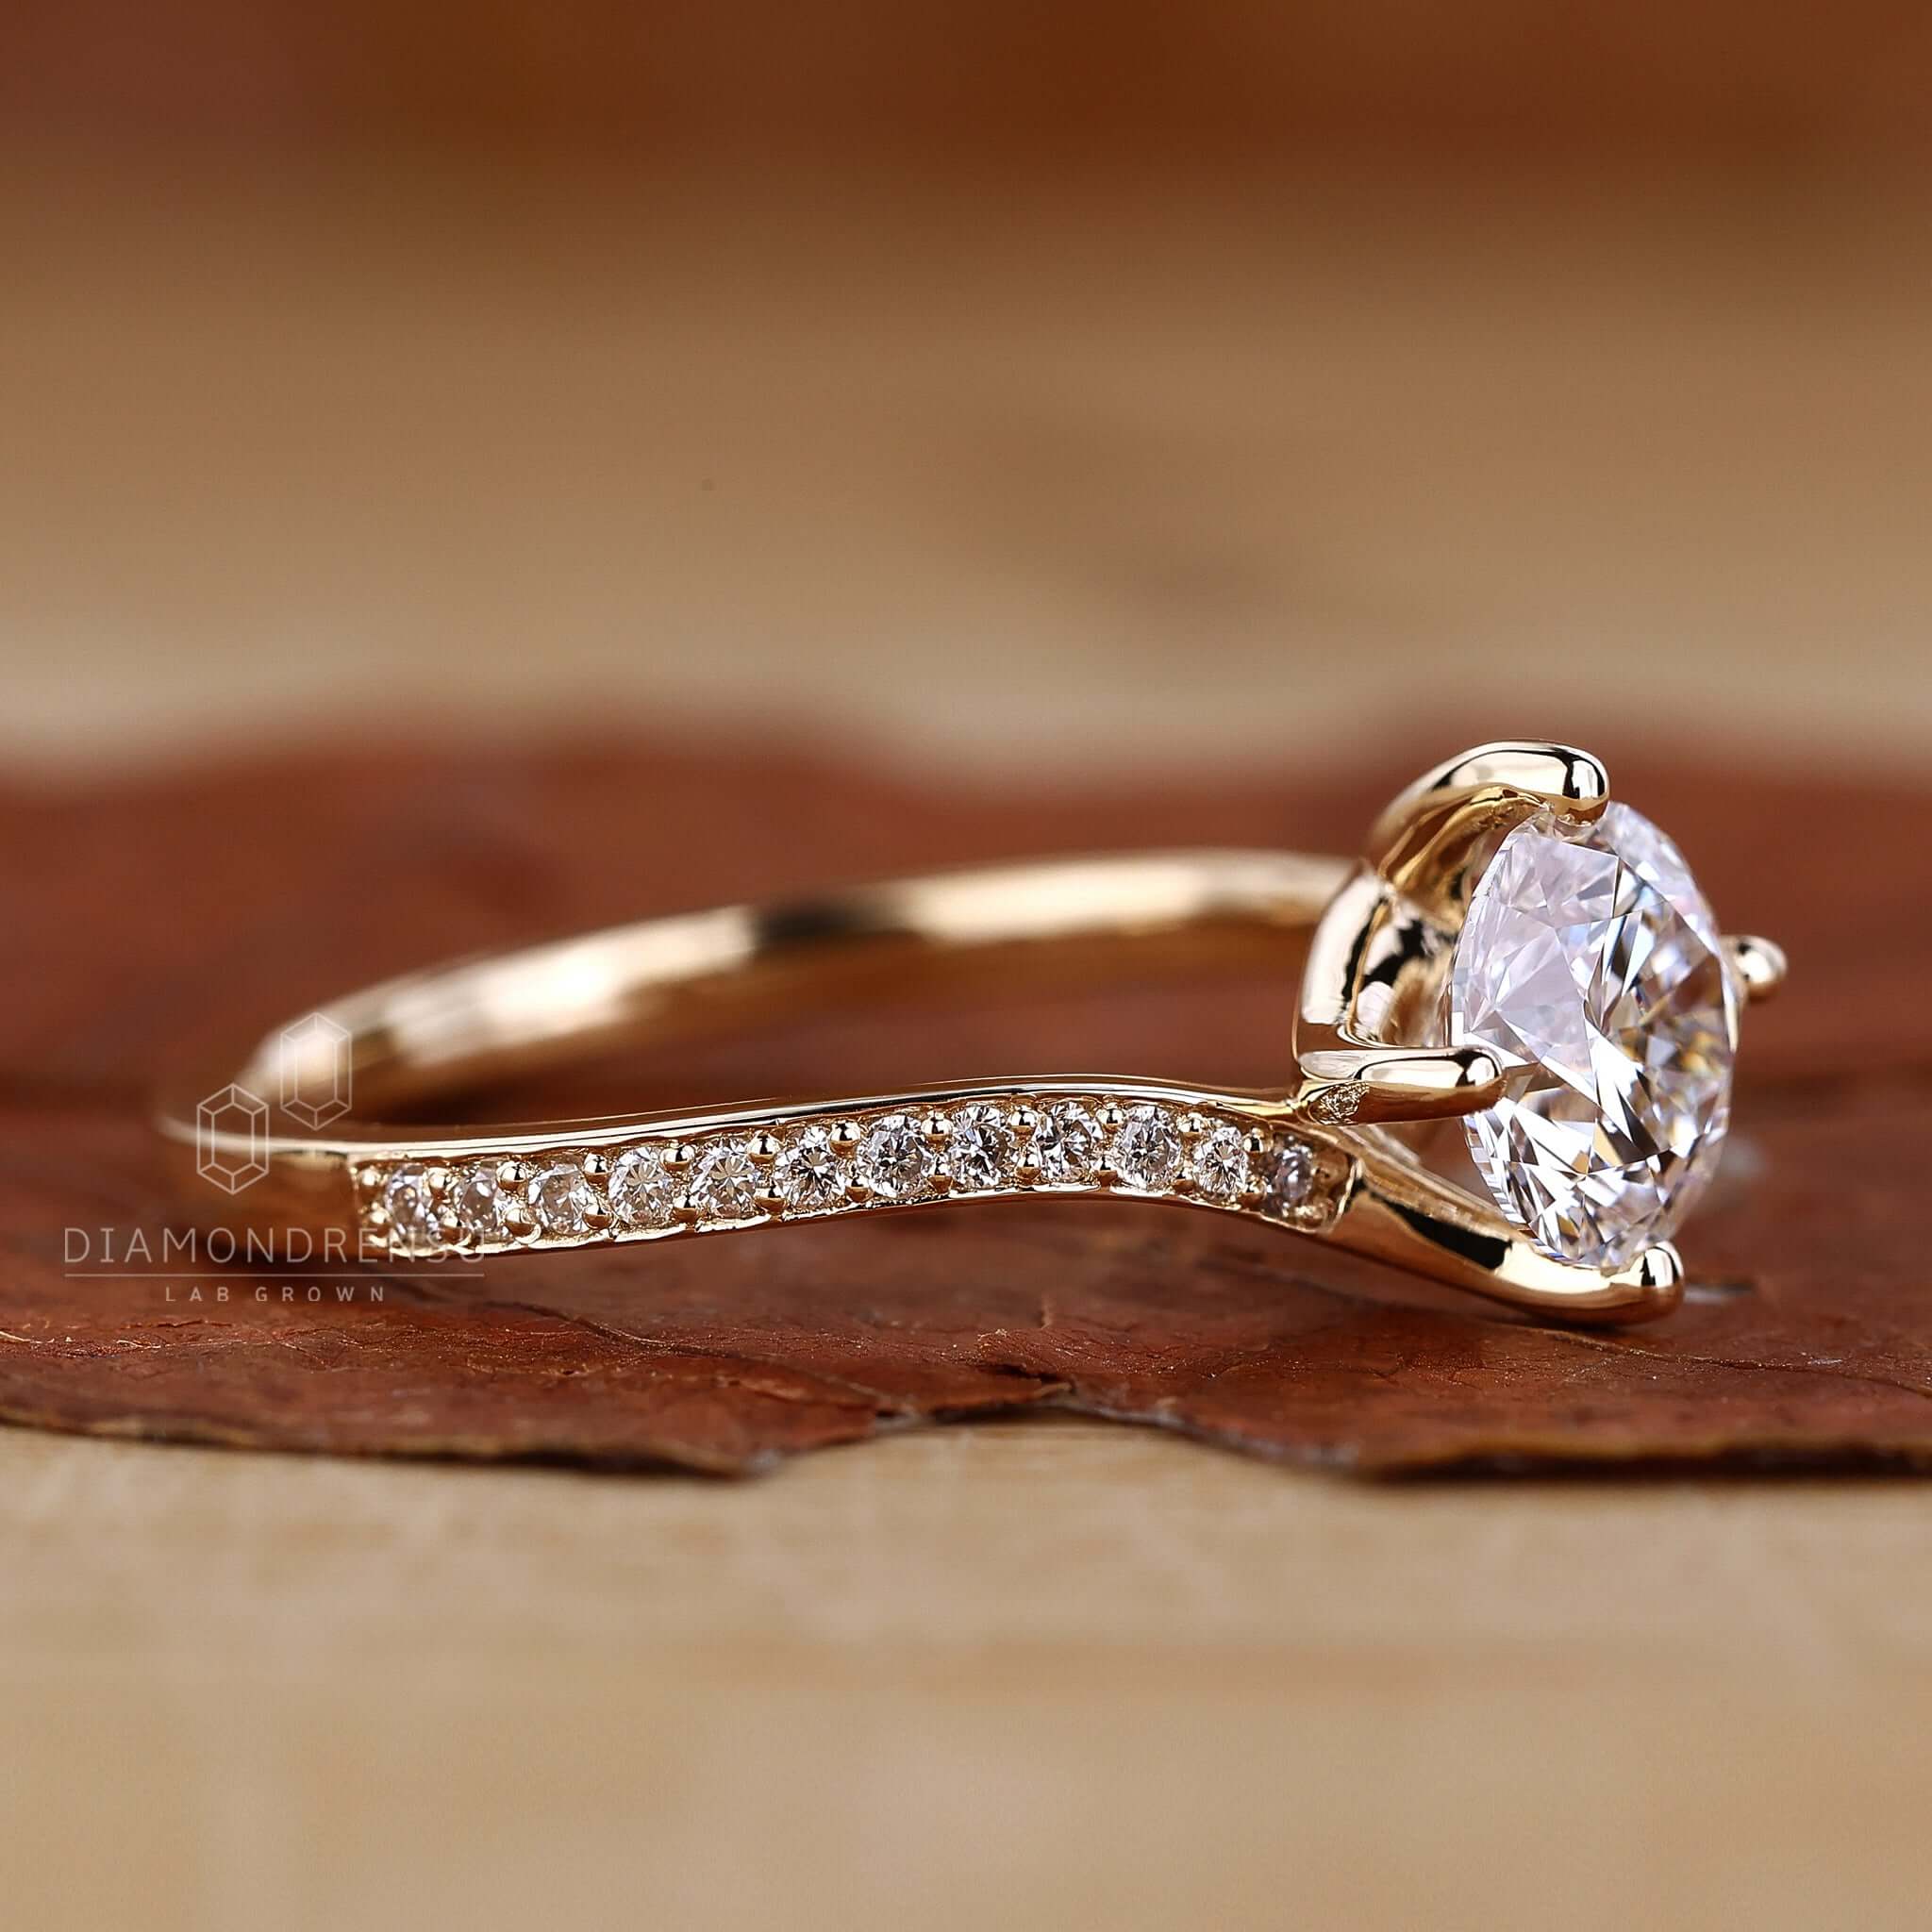 Hand wearing a dazzling bypass diamond ring, emphasizing its intricate design and sparkling stones.